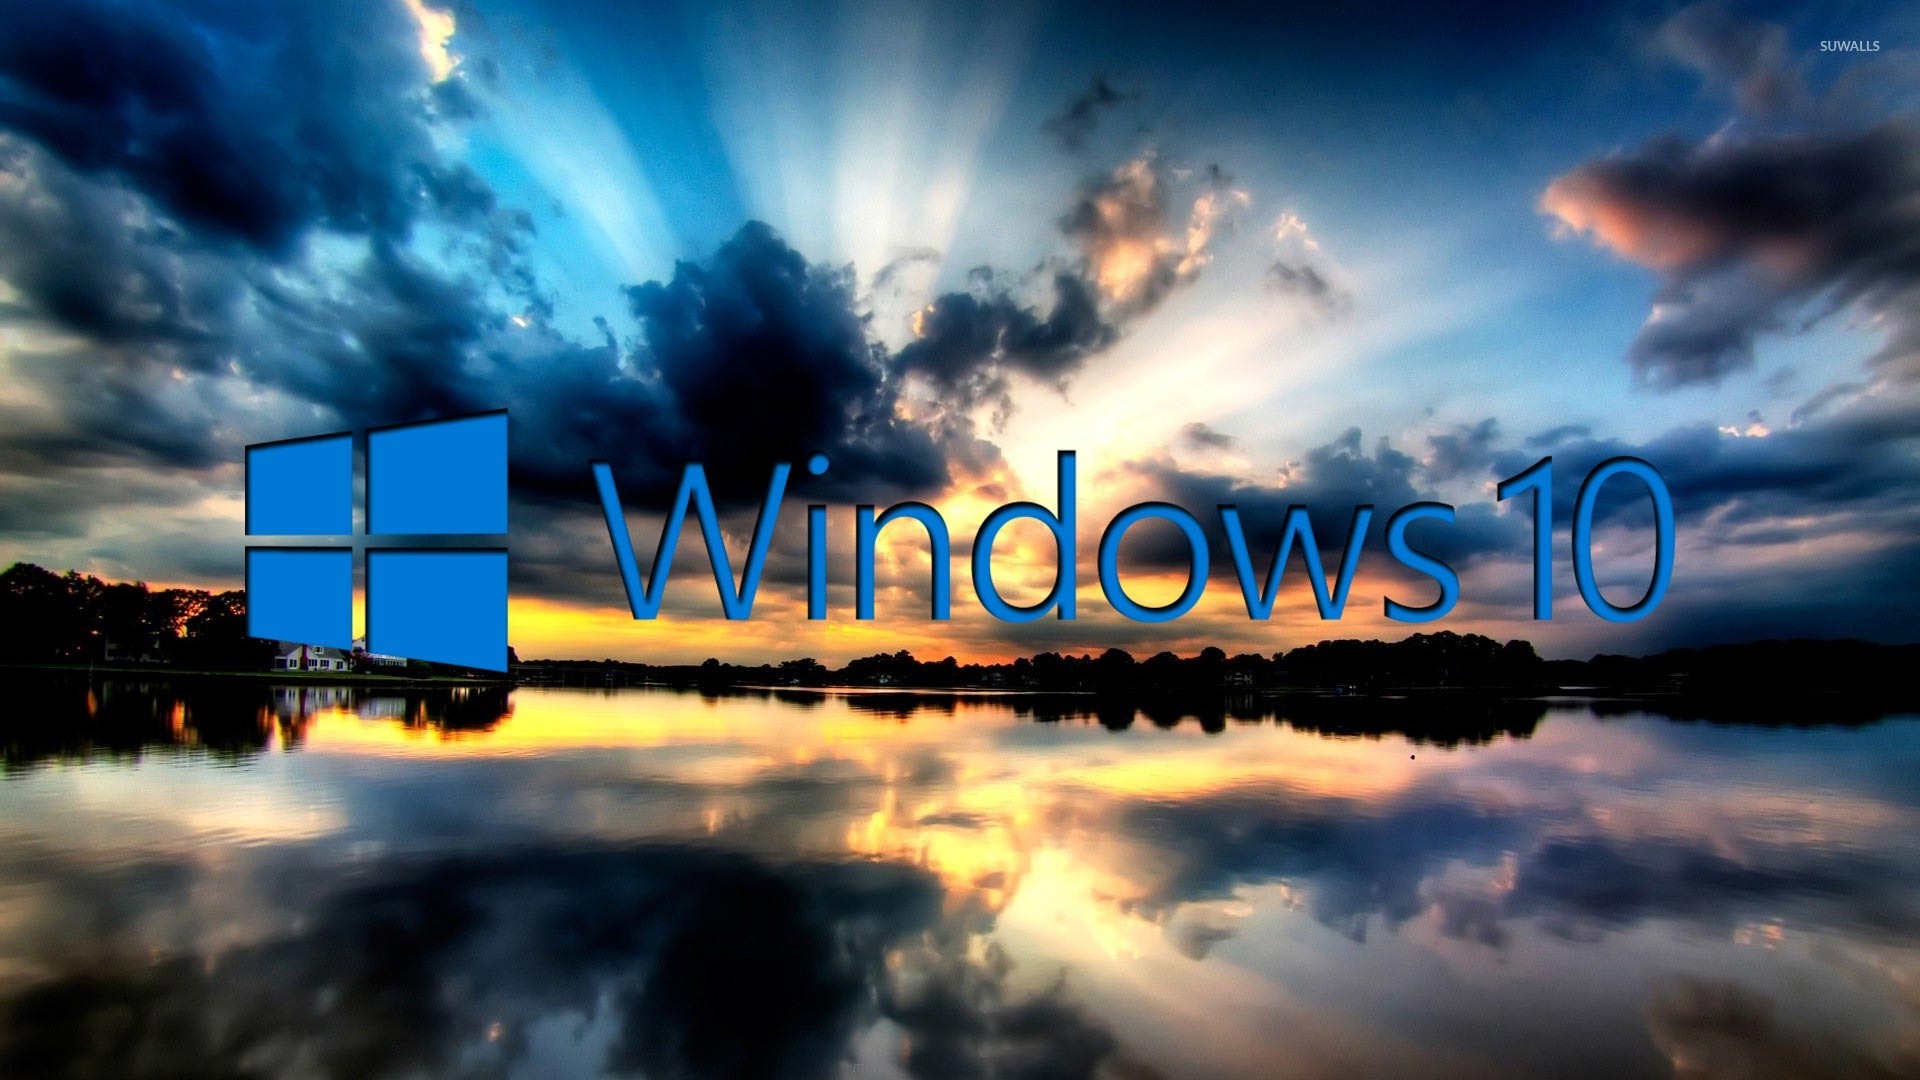 Windows 10 on the reflected clouds 3